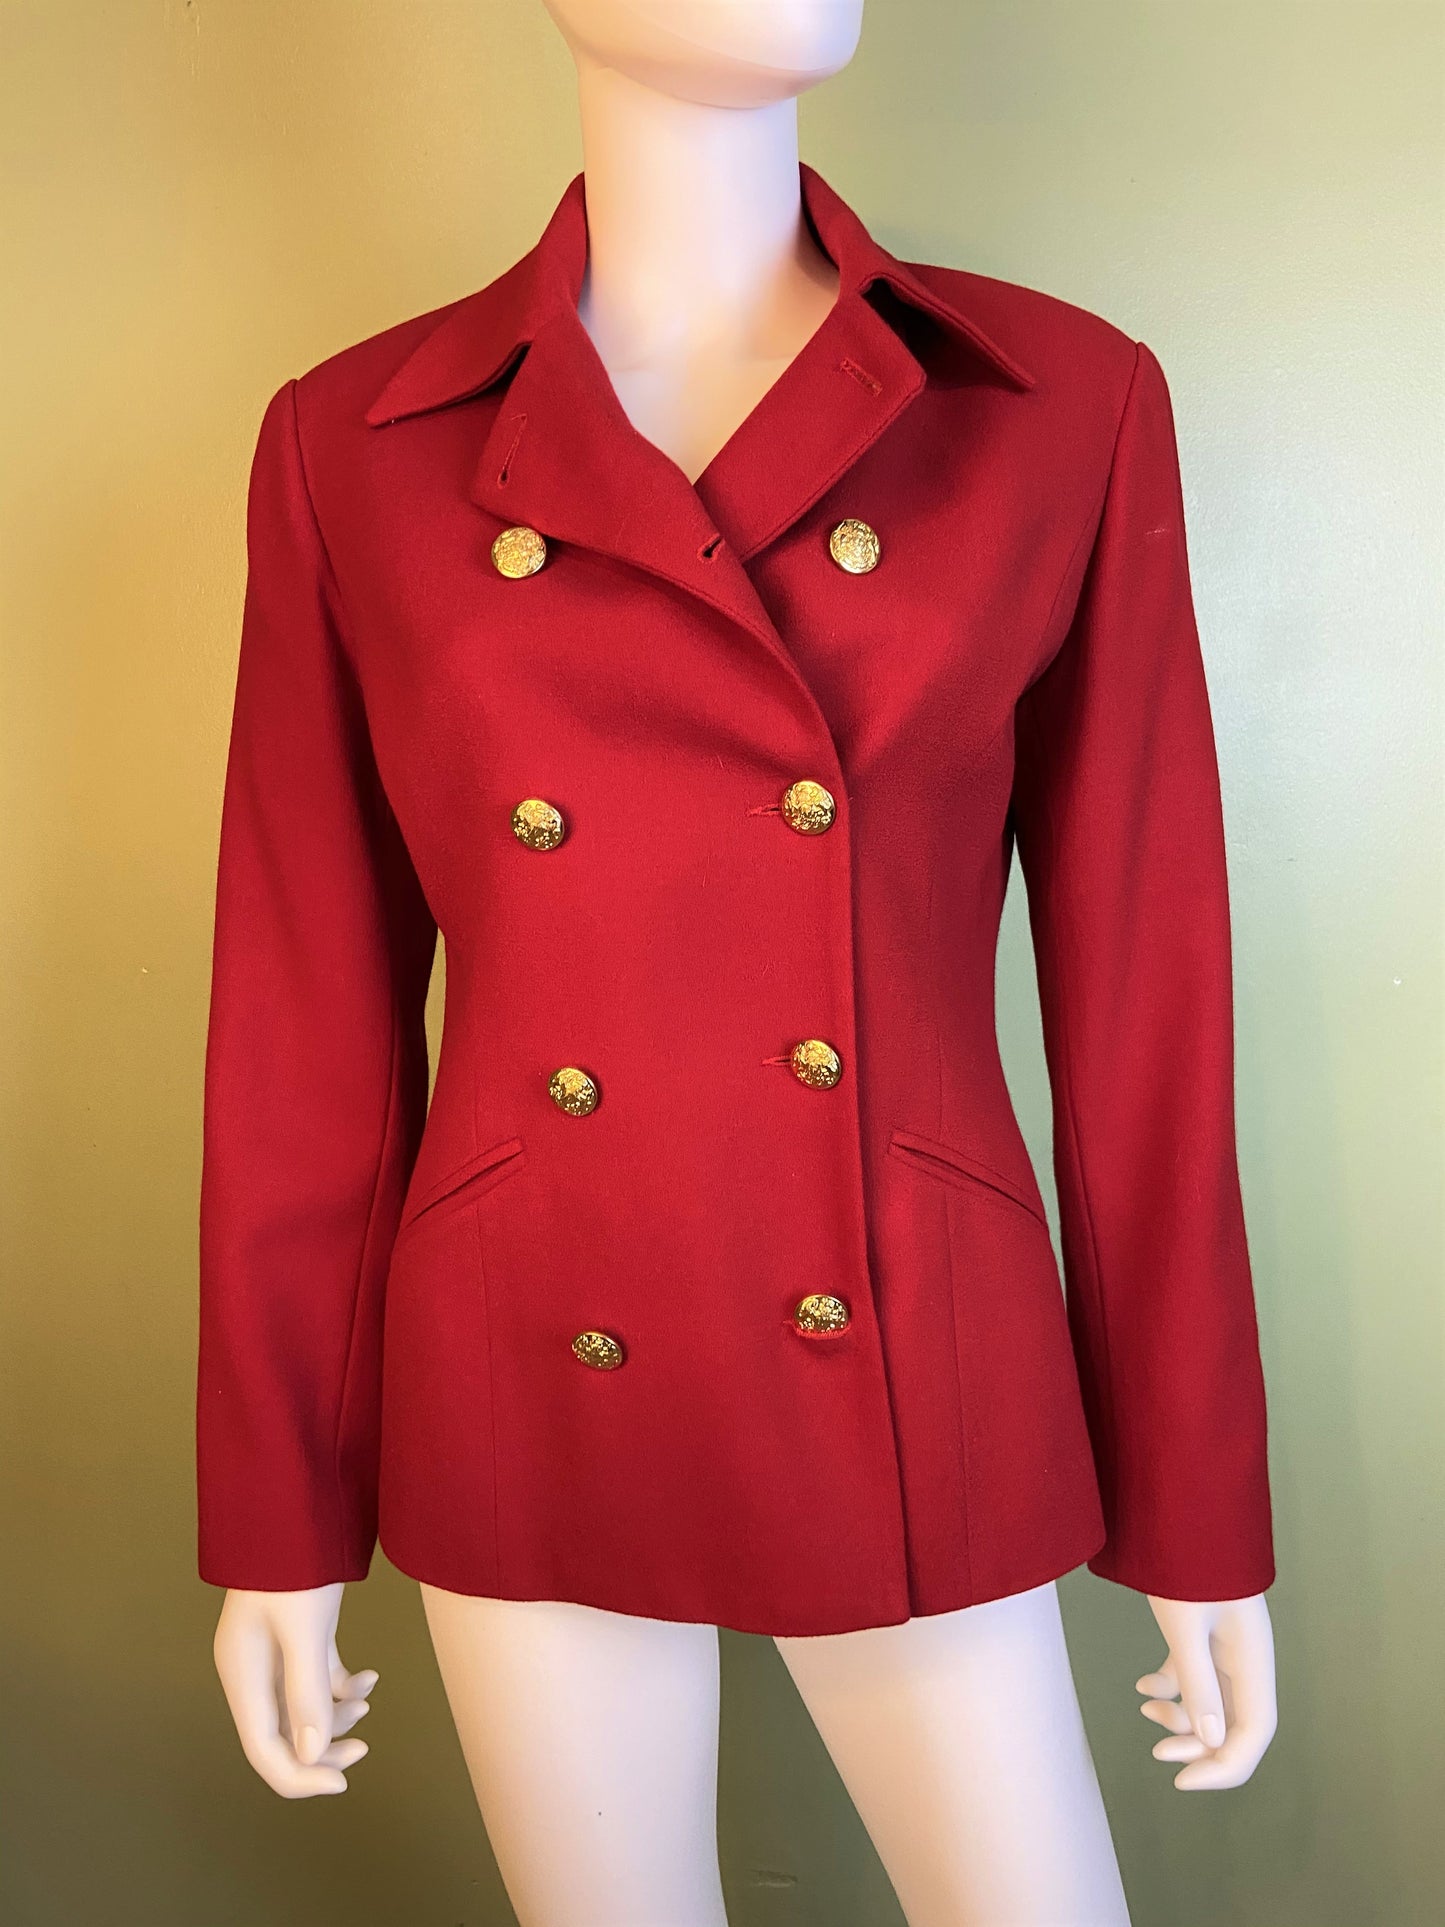 Red Wool Double Breasted Blazer